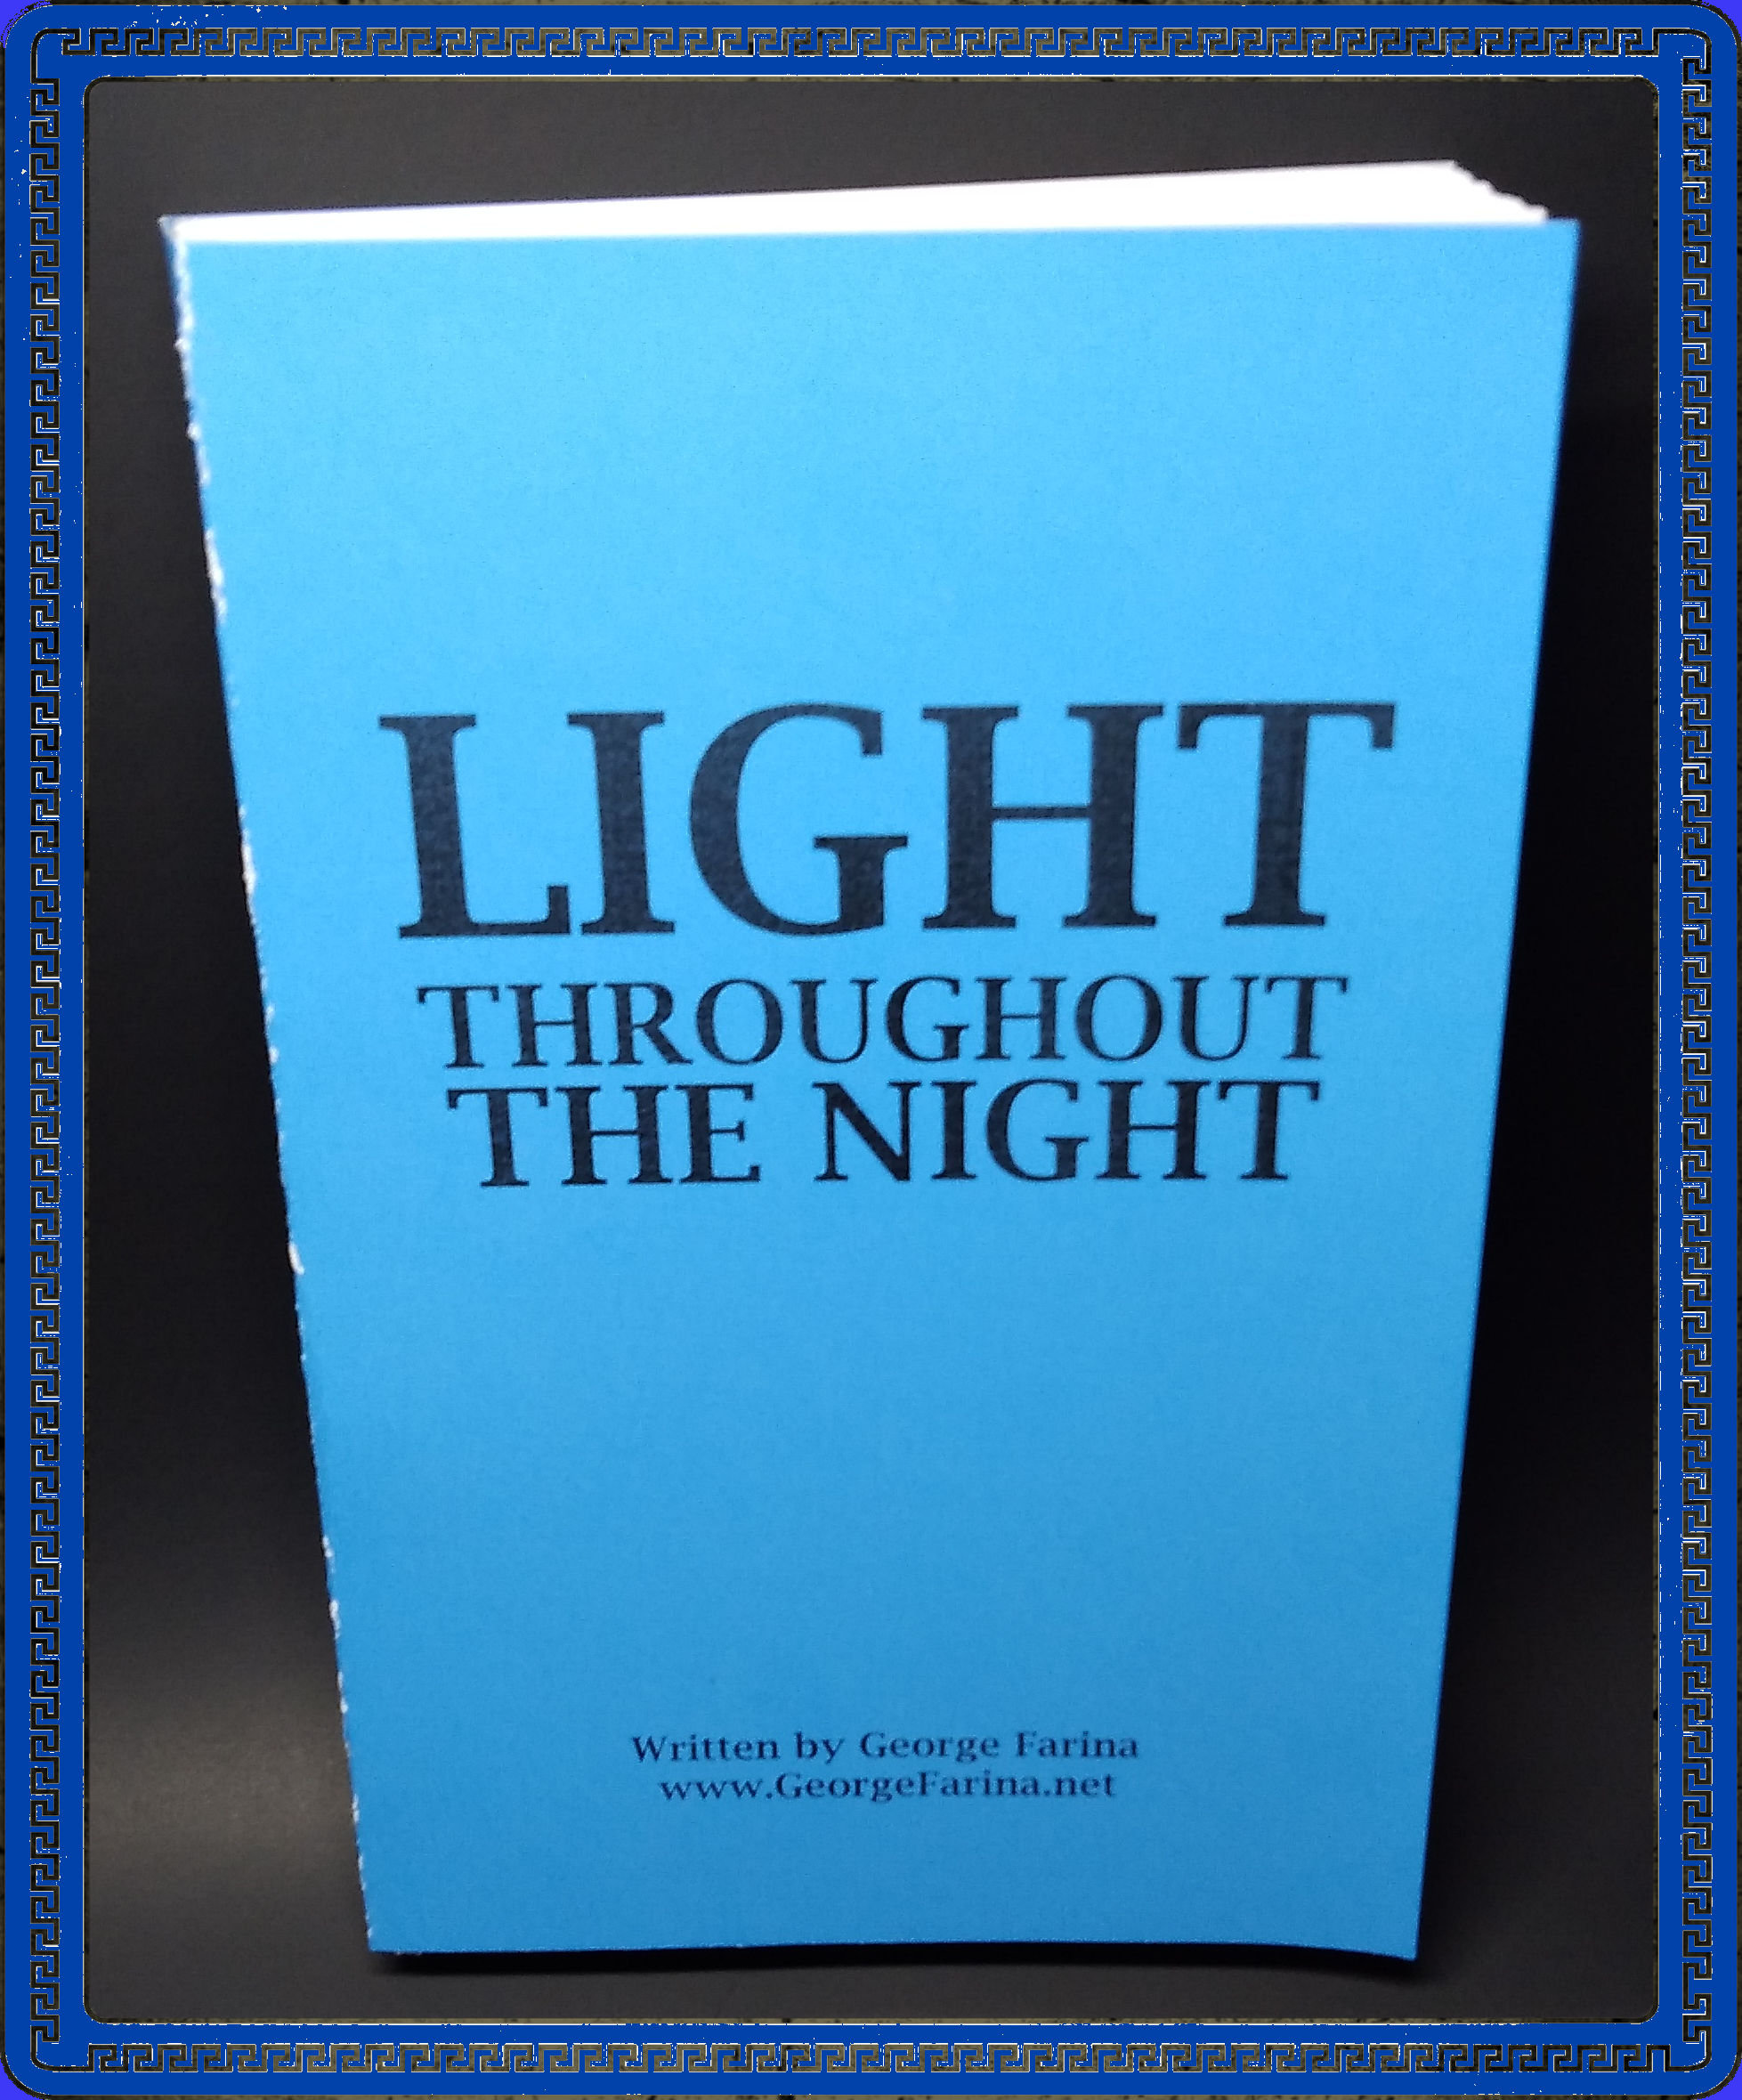 Light Throughout The Night by George Farina